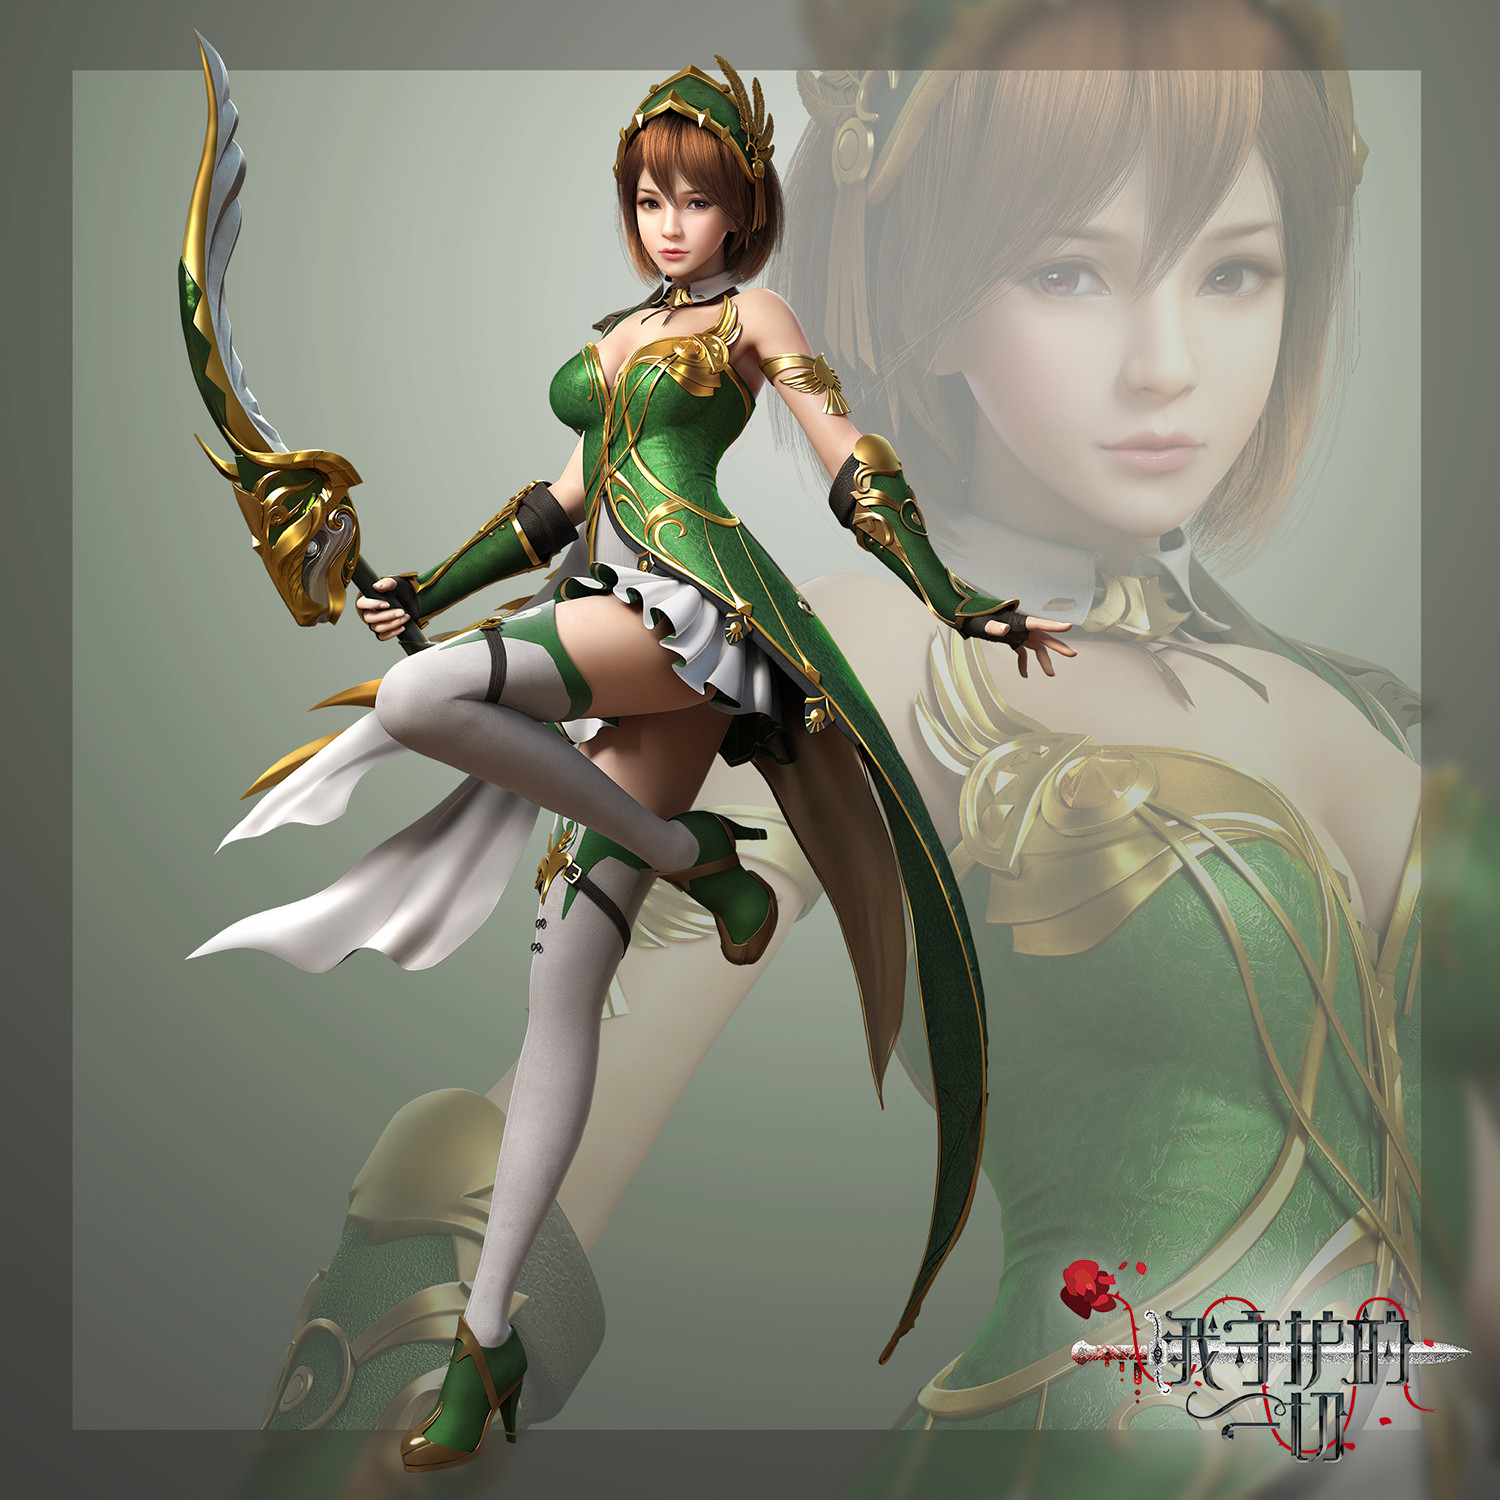 General 1500x1500 3Q Studio drawing women brunette short hair bangs hair accessories gold feathers brown eyes dress thigh high socks shoes high heels archer bow weapon armlet gloves frame